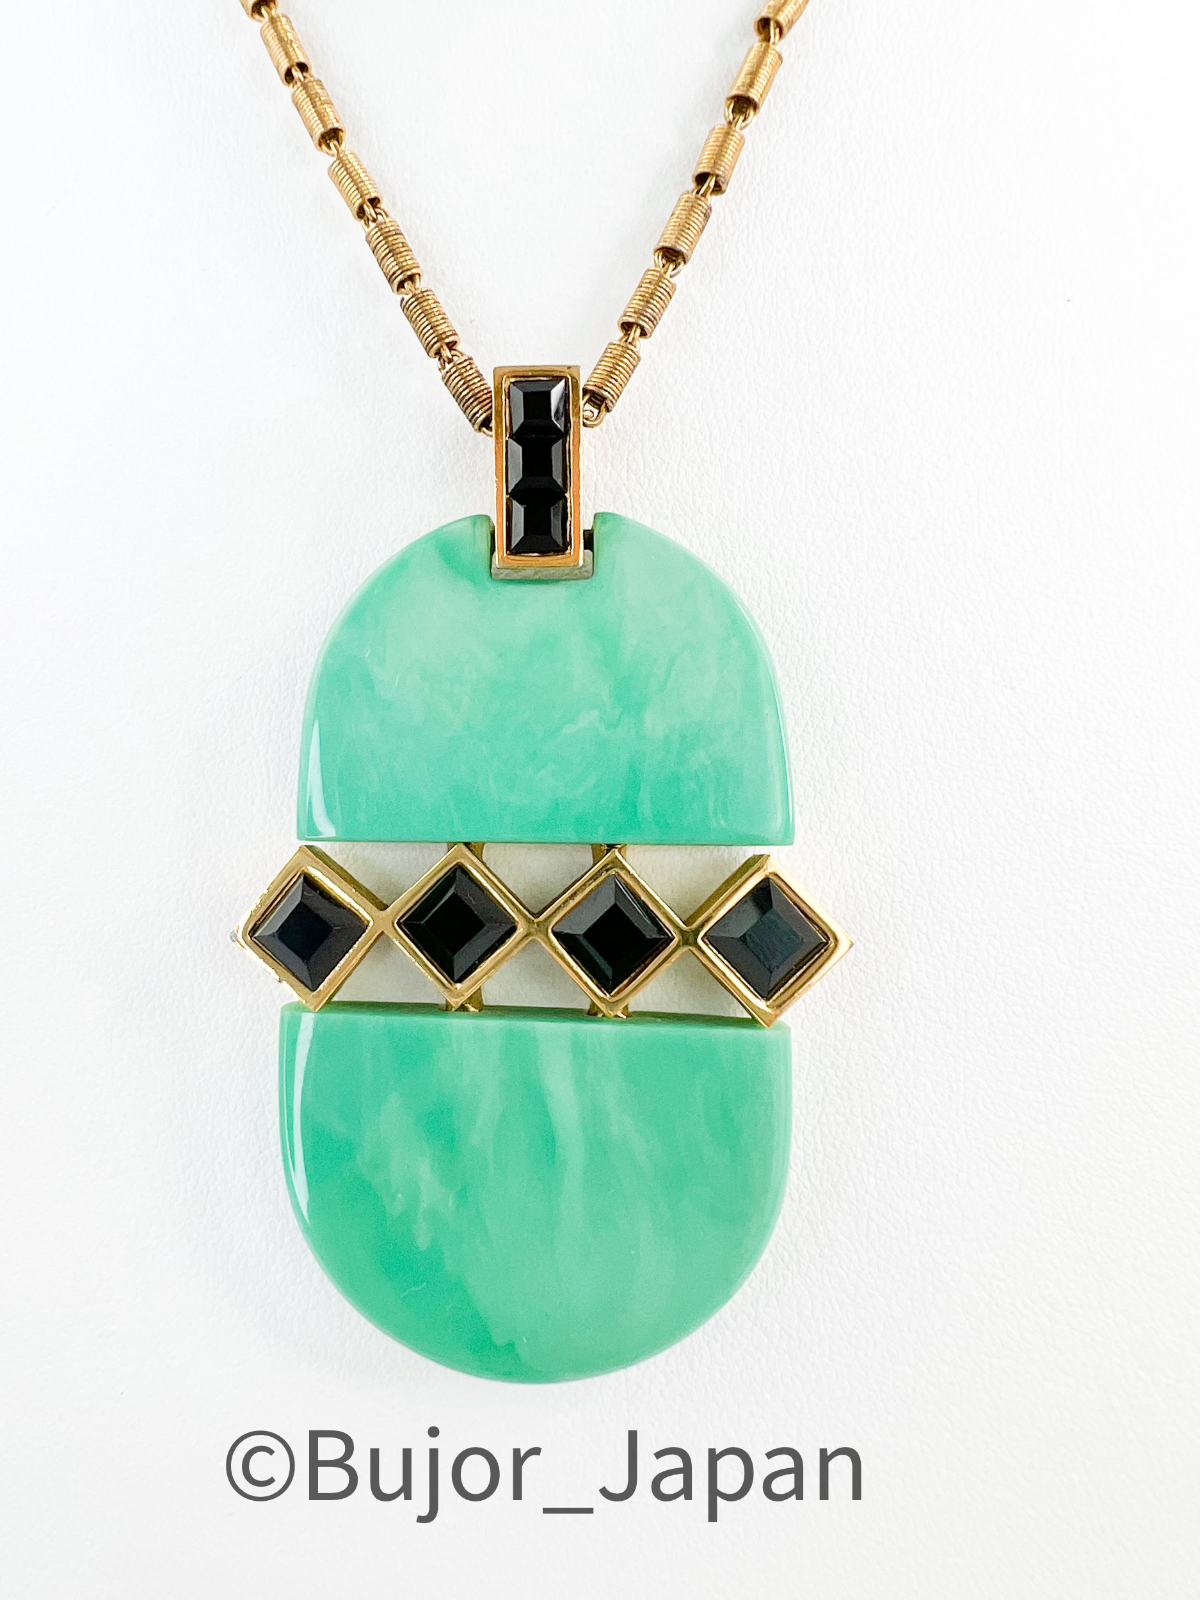 Vintage Givenchy Necklace, Givenchy Green Long necklace, Necklace Gold, Vintage Necklace Pendant, Jewelry for Women, Gift for her